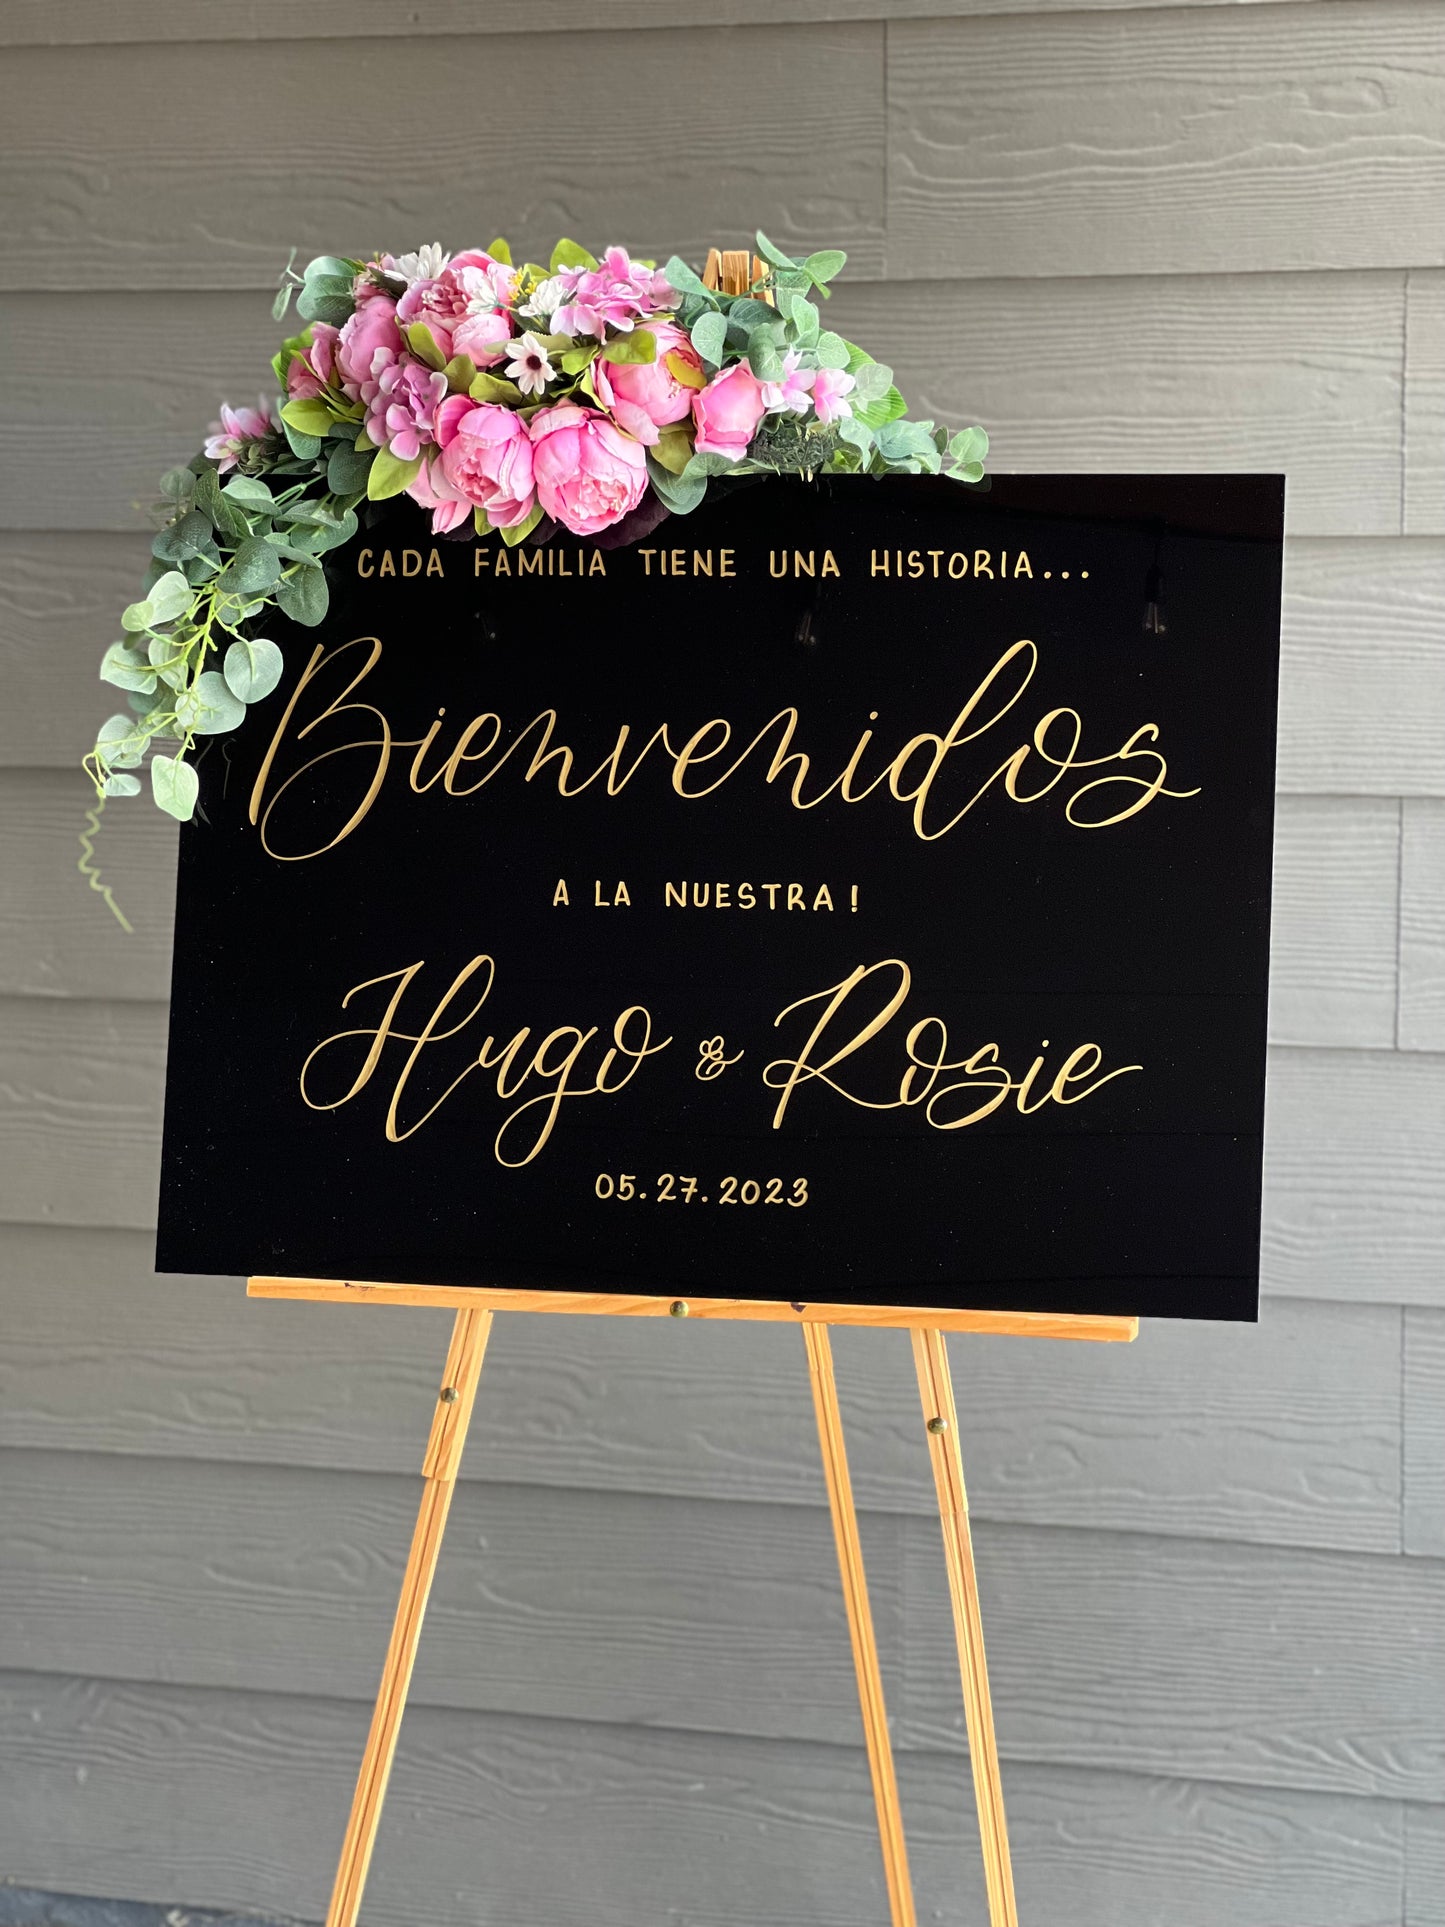 Black Acrylic Wedding Welcome Sign | Modern Chic Wedding Welcome Sign | Black Acrylic Custom Calligraphy Sign